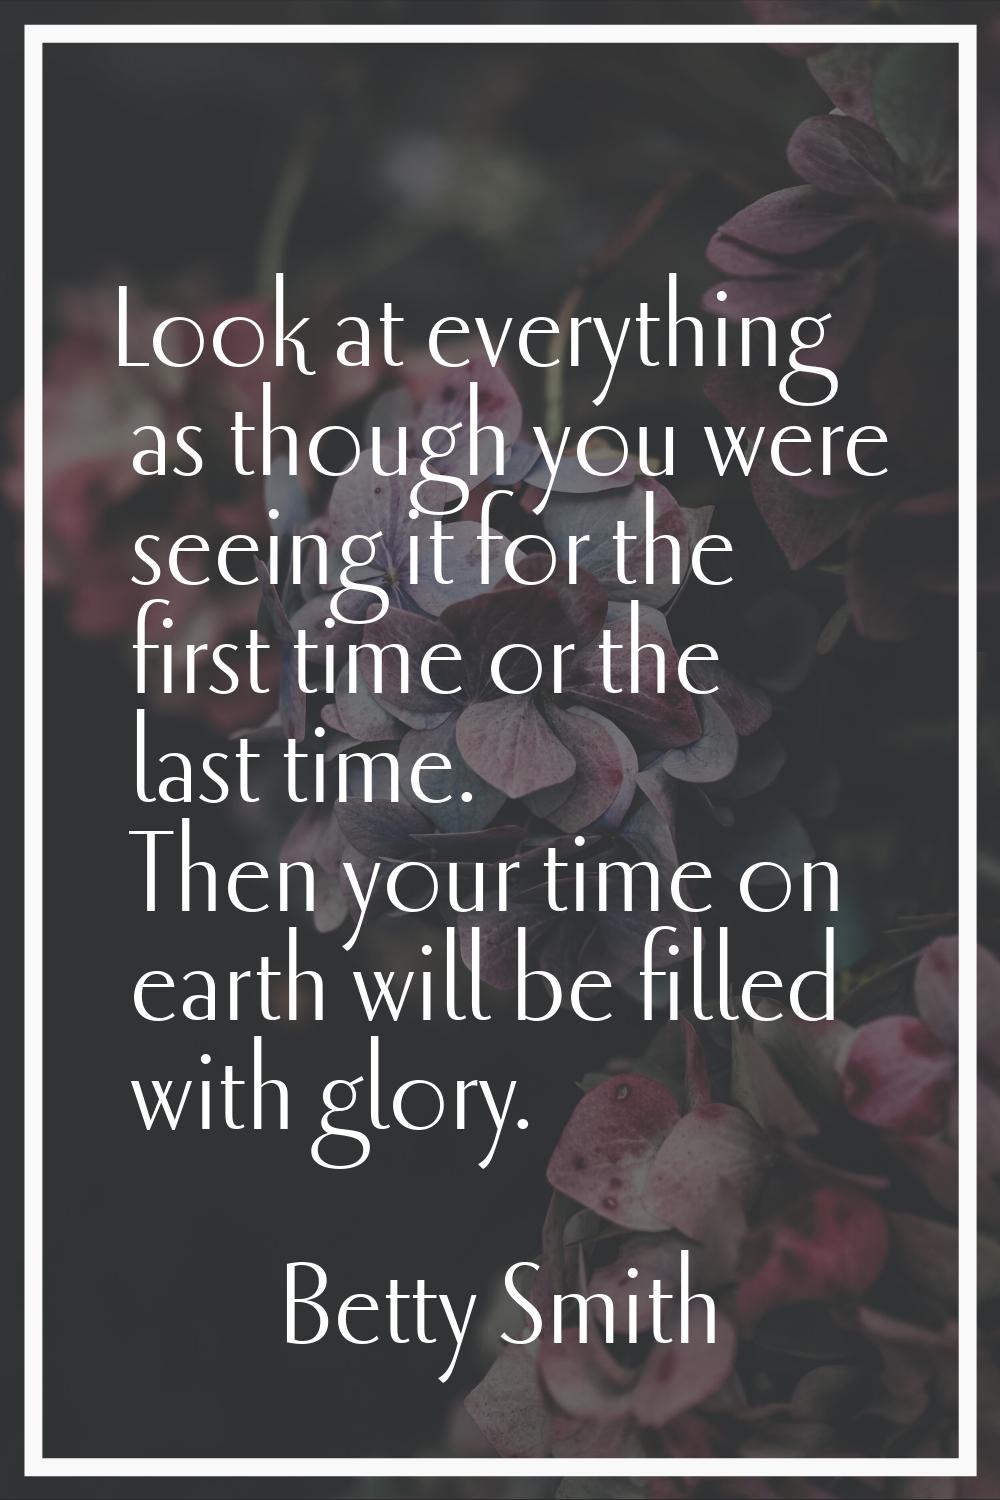 Look at everything as though you were seeing it for the first time or the last time. Then your time